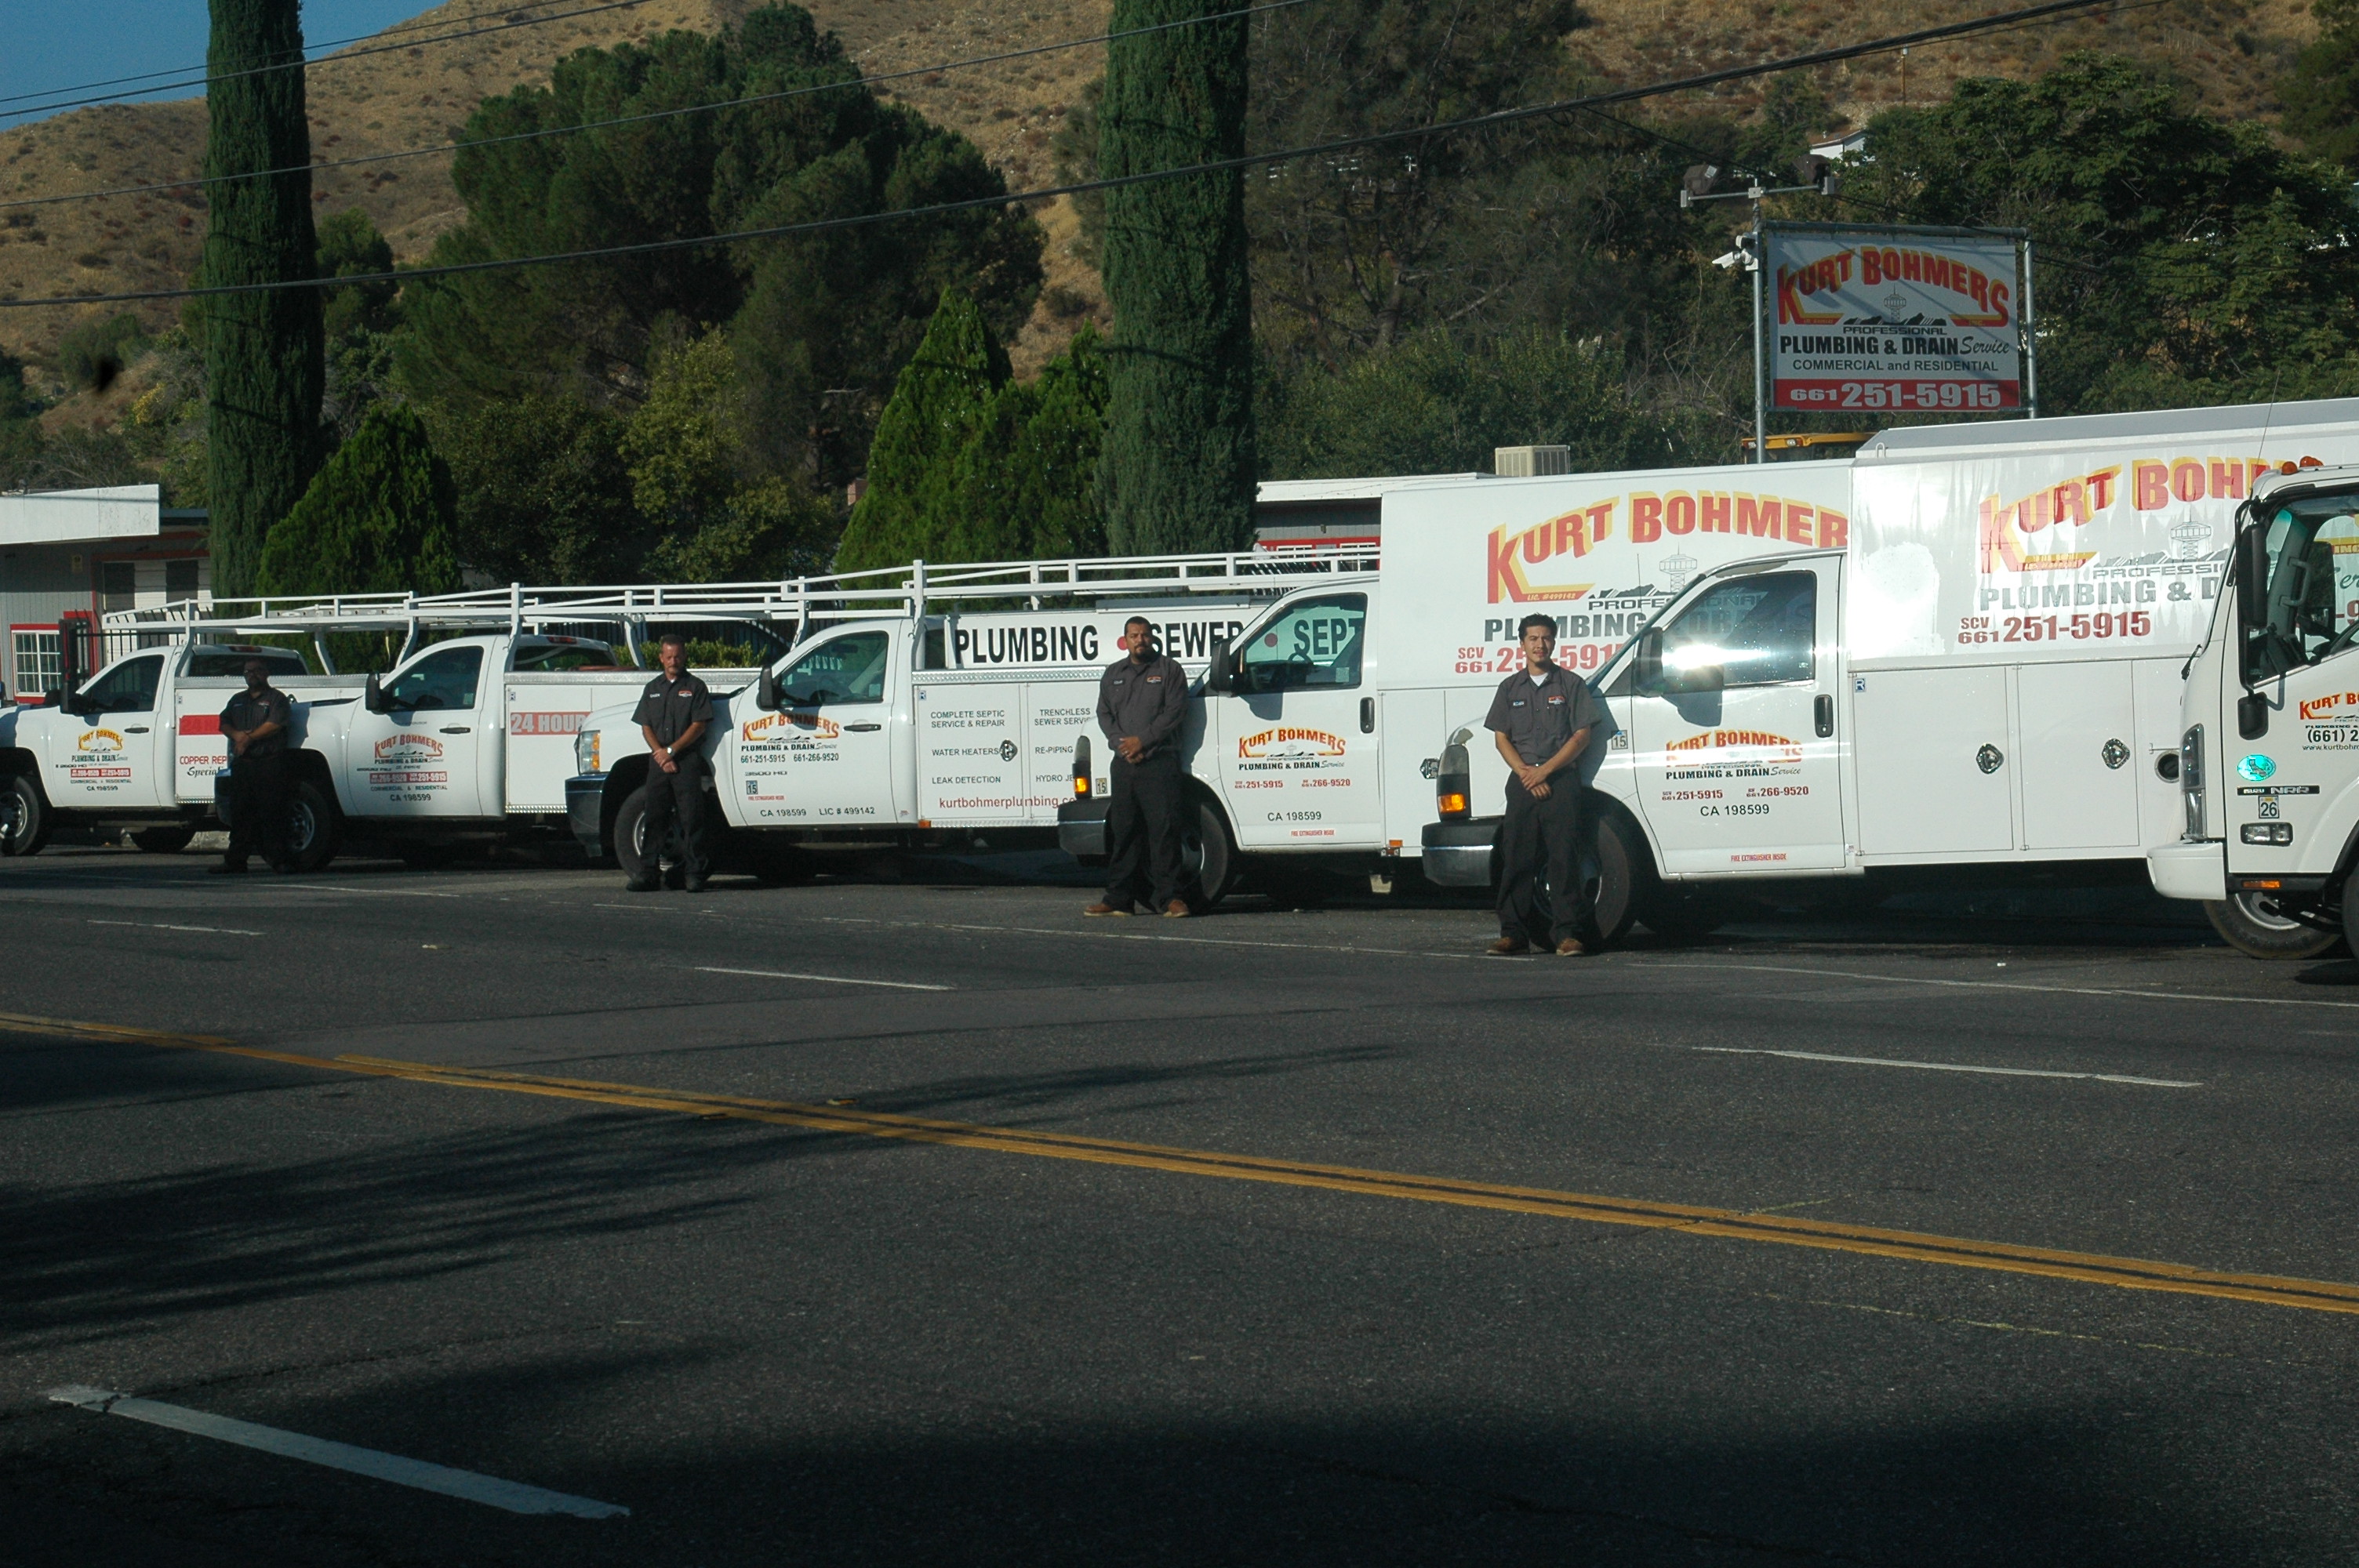 Kurt Bohmers Plumbing employees standing in front of their service trucks